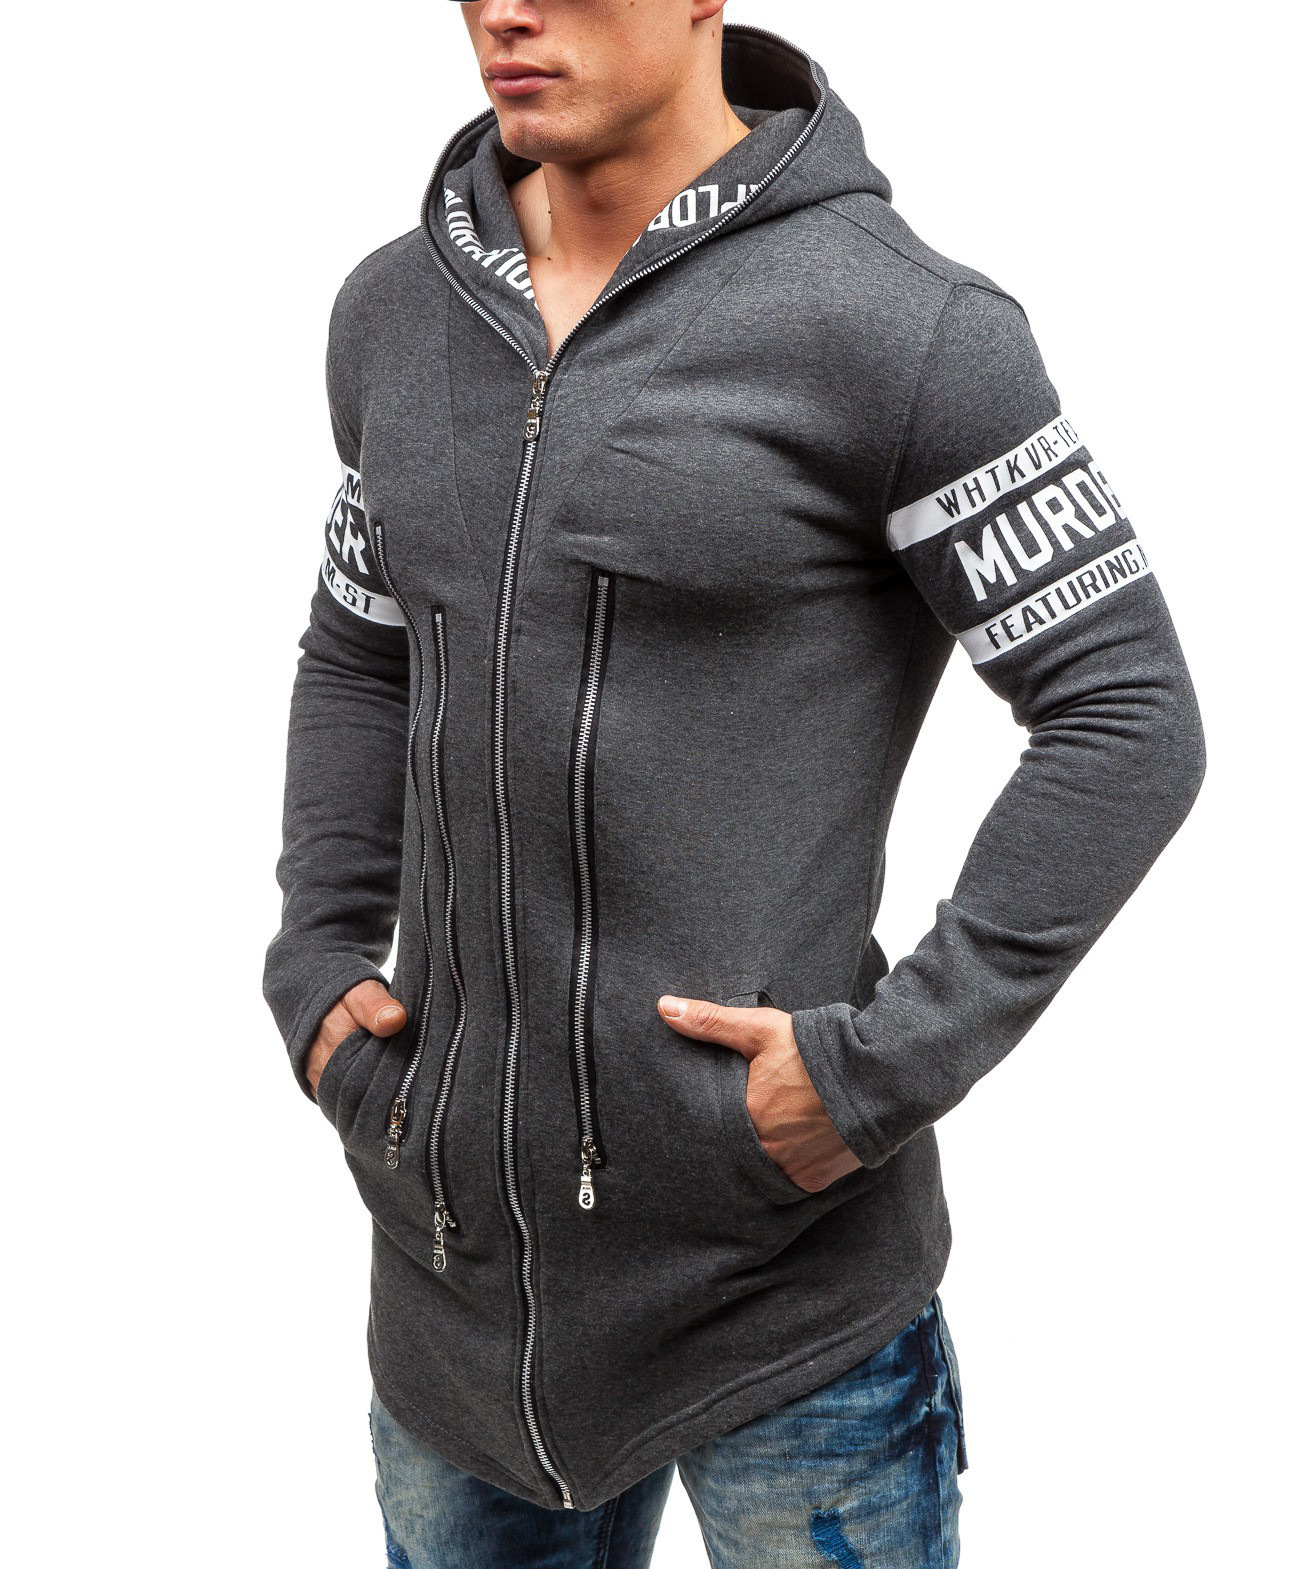 HD-DST-2016-autumn-and-winter-fashion-men39s-hoodies-casual-slim-fit-cotton-printing-hooded-coat-per-32770037440